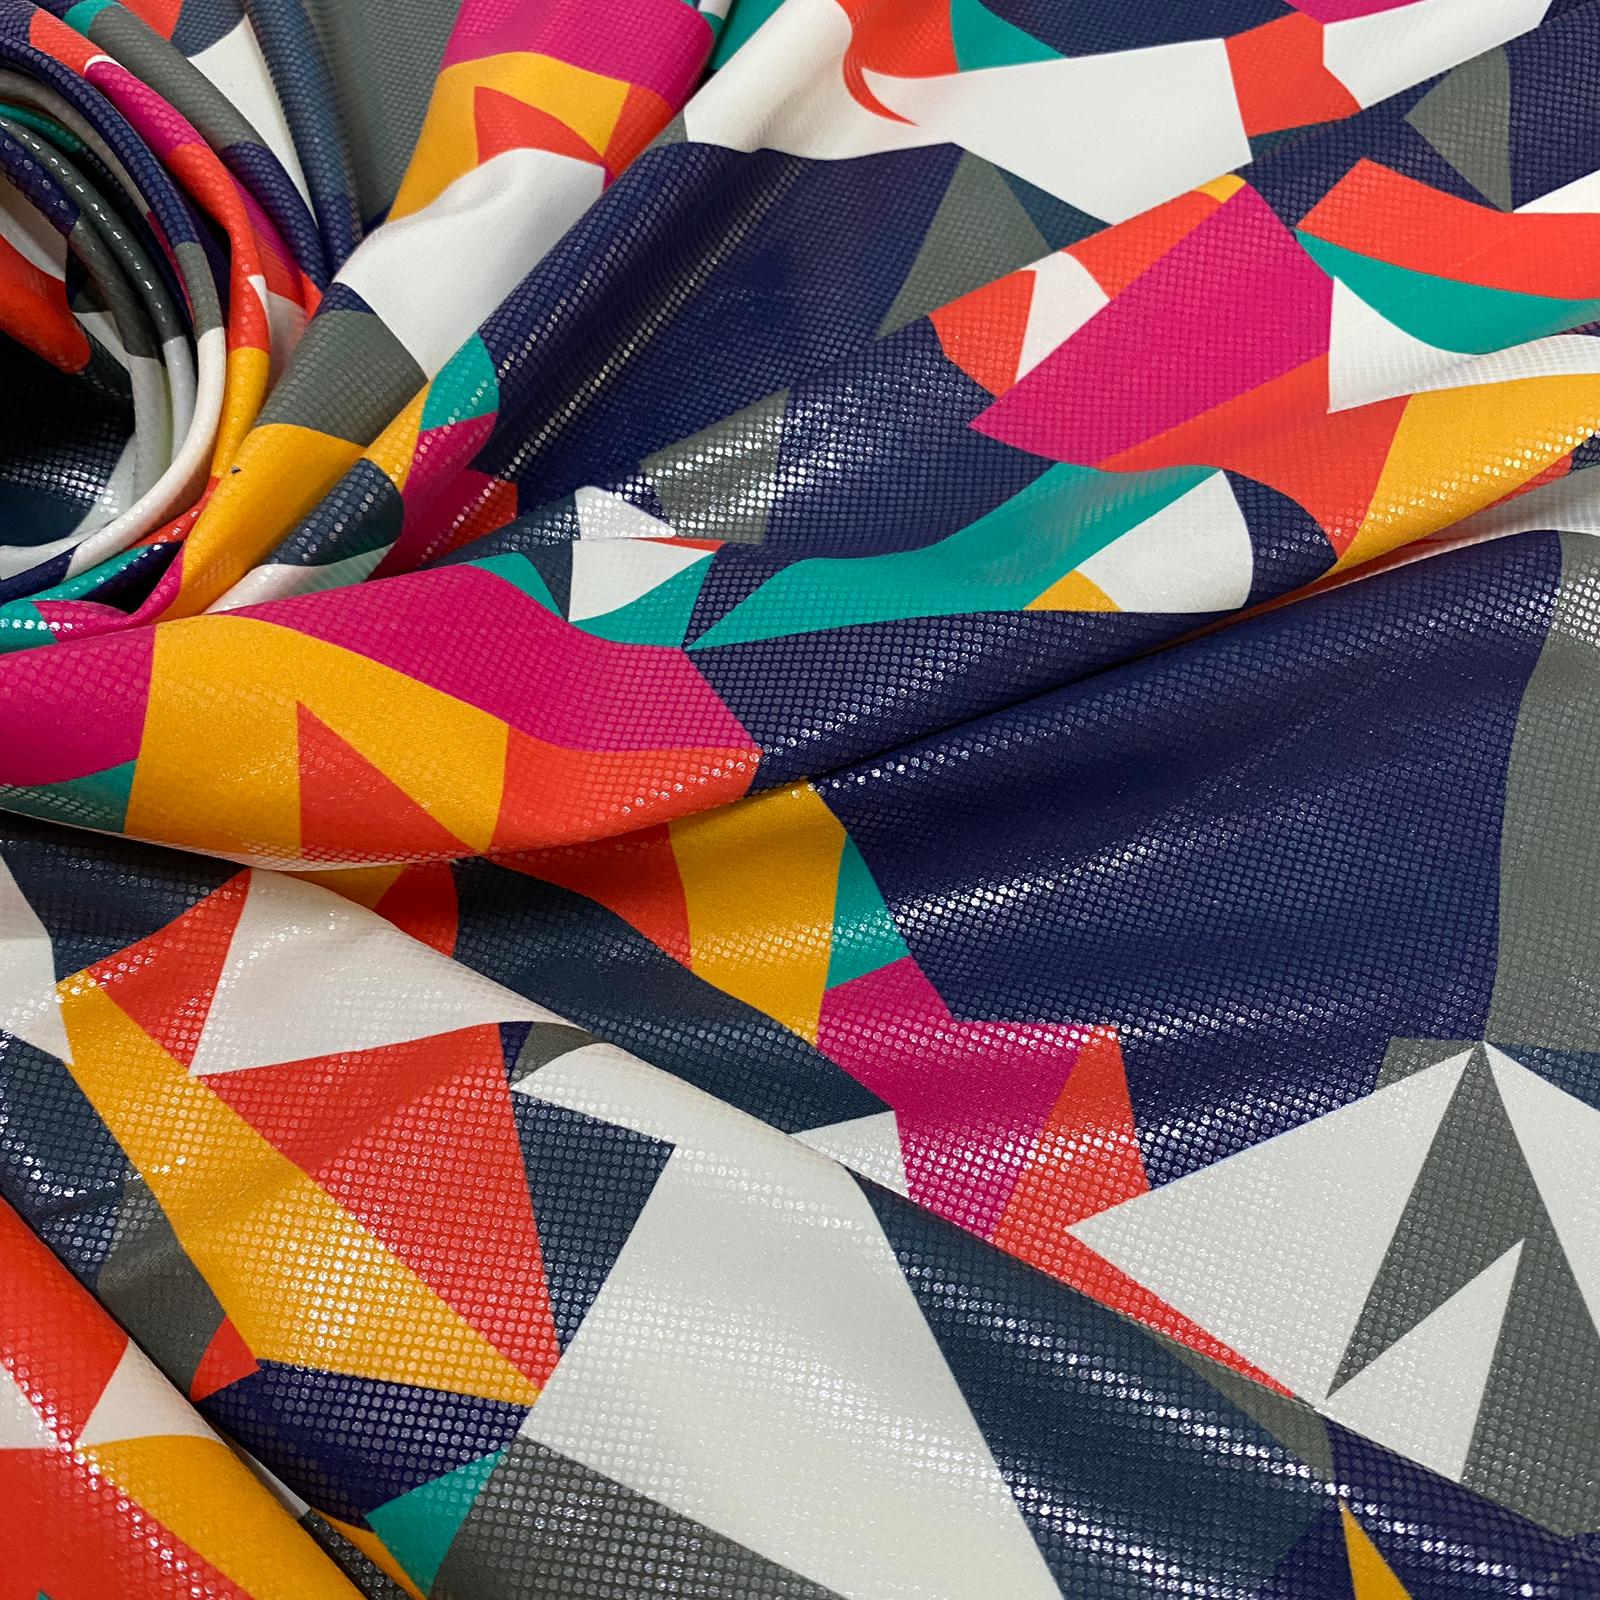 New modern abstract design print on nylon spandex with foil 4-way stretch 58/60” Sold by the YD